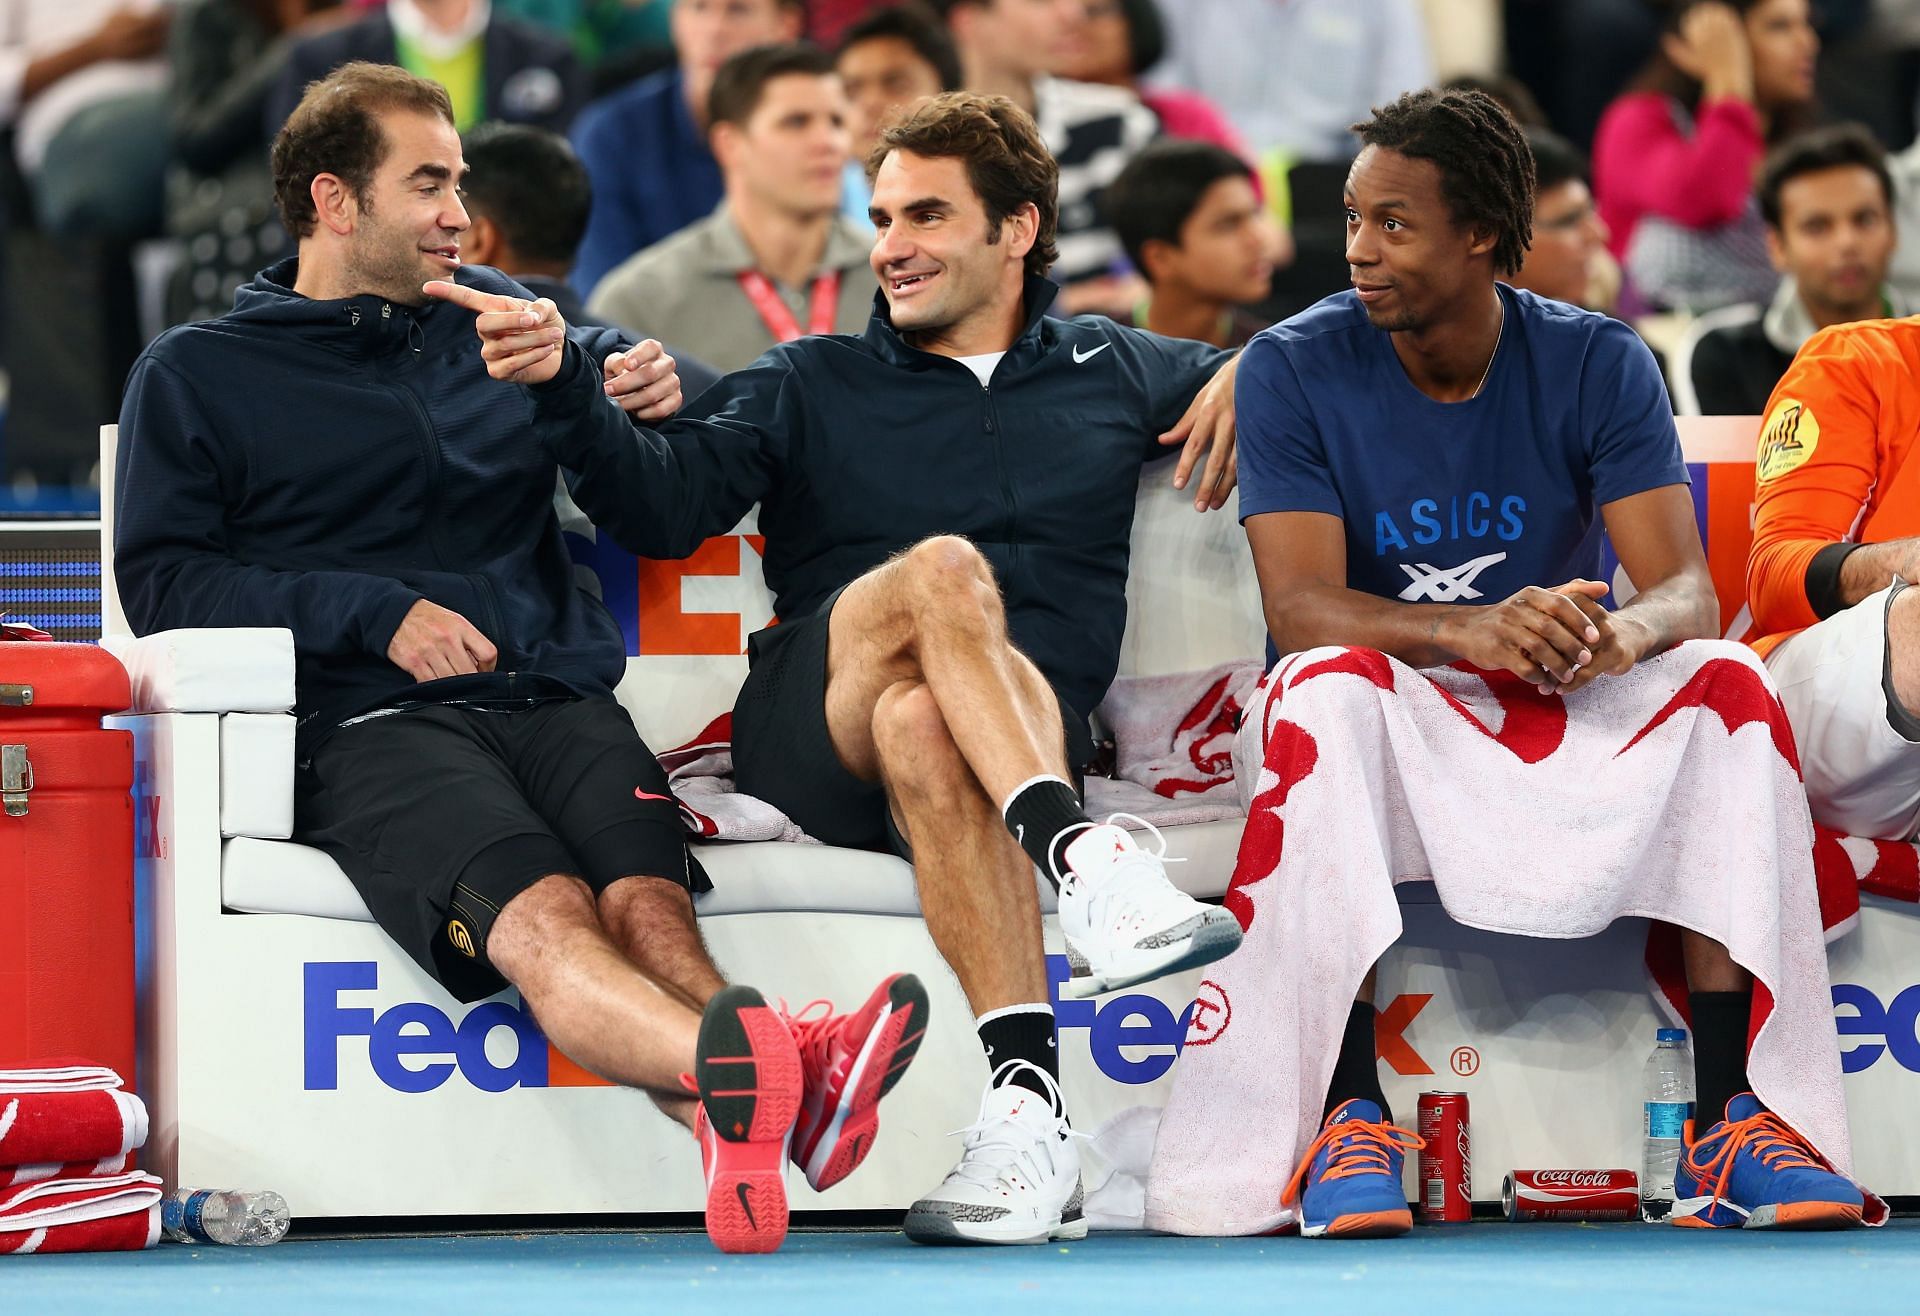 Pete Sampras, Roger Federer and Gael Monfils (from left to right)